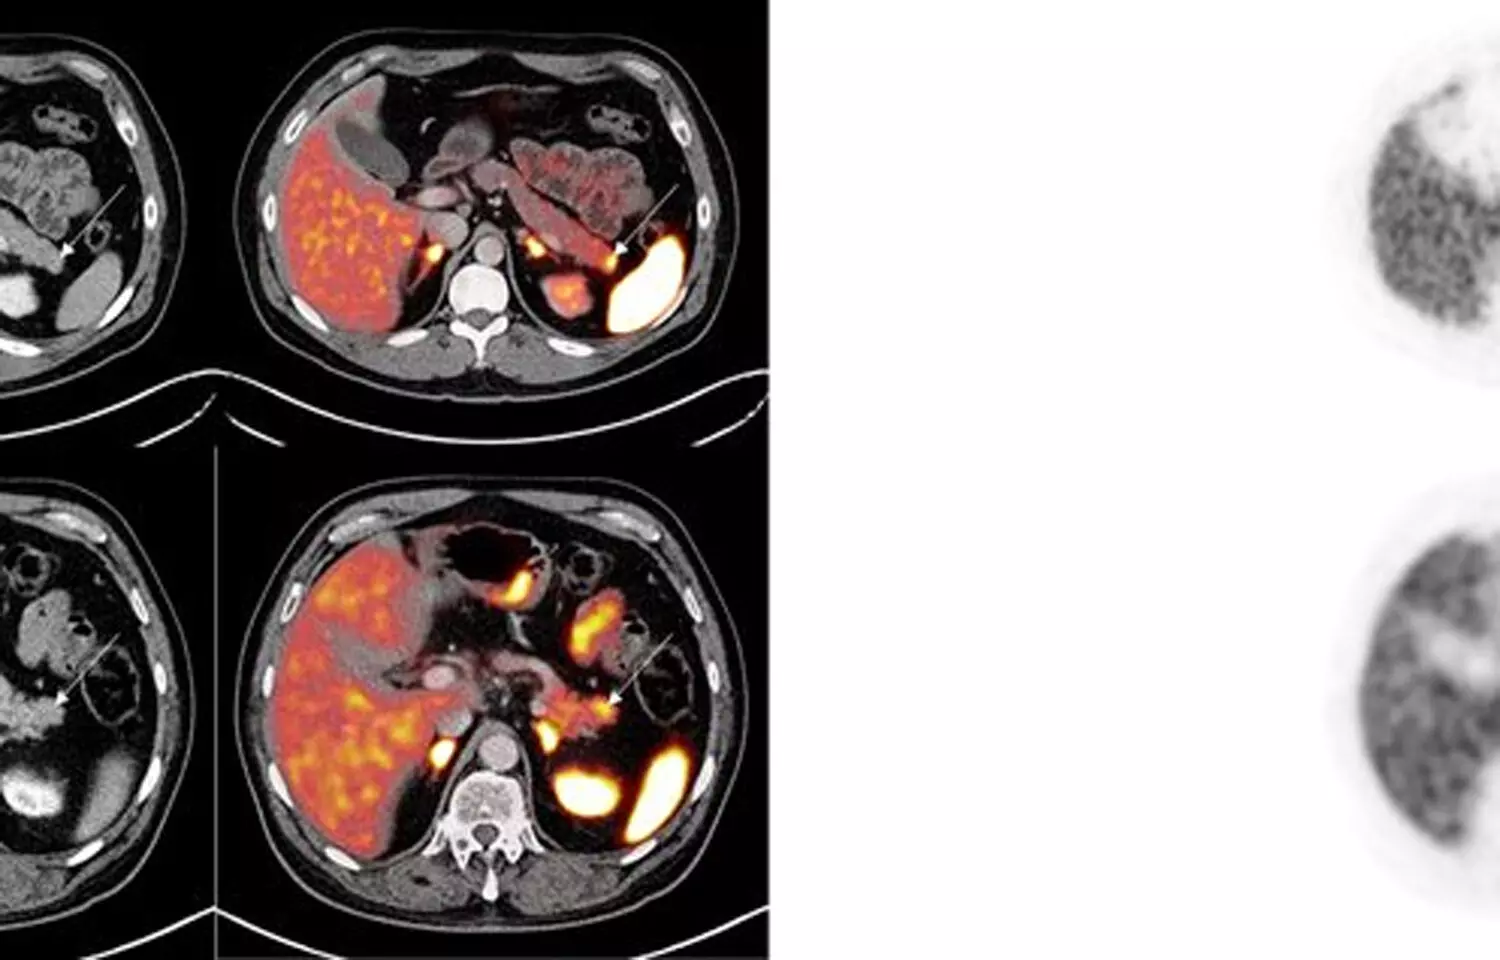 Imaging with PET/CT with Ga-68 tracer helps in accurate staging in cancer patients: Study